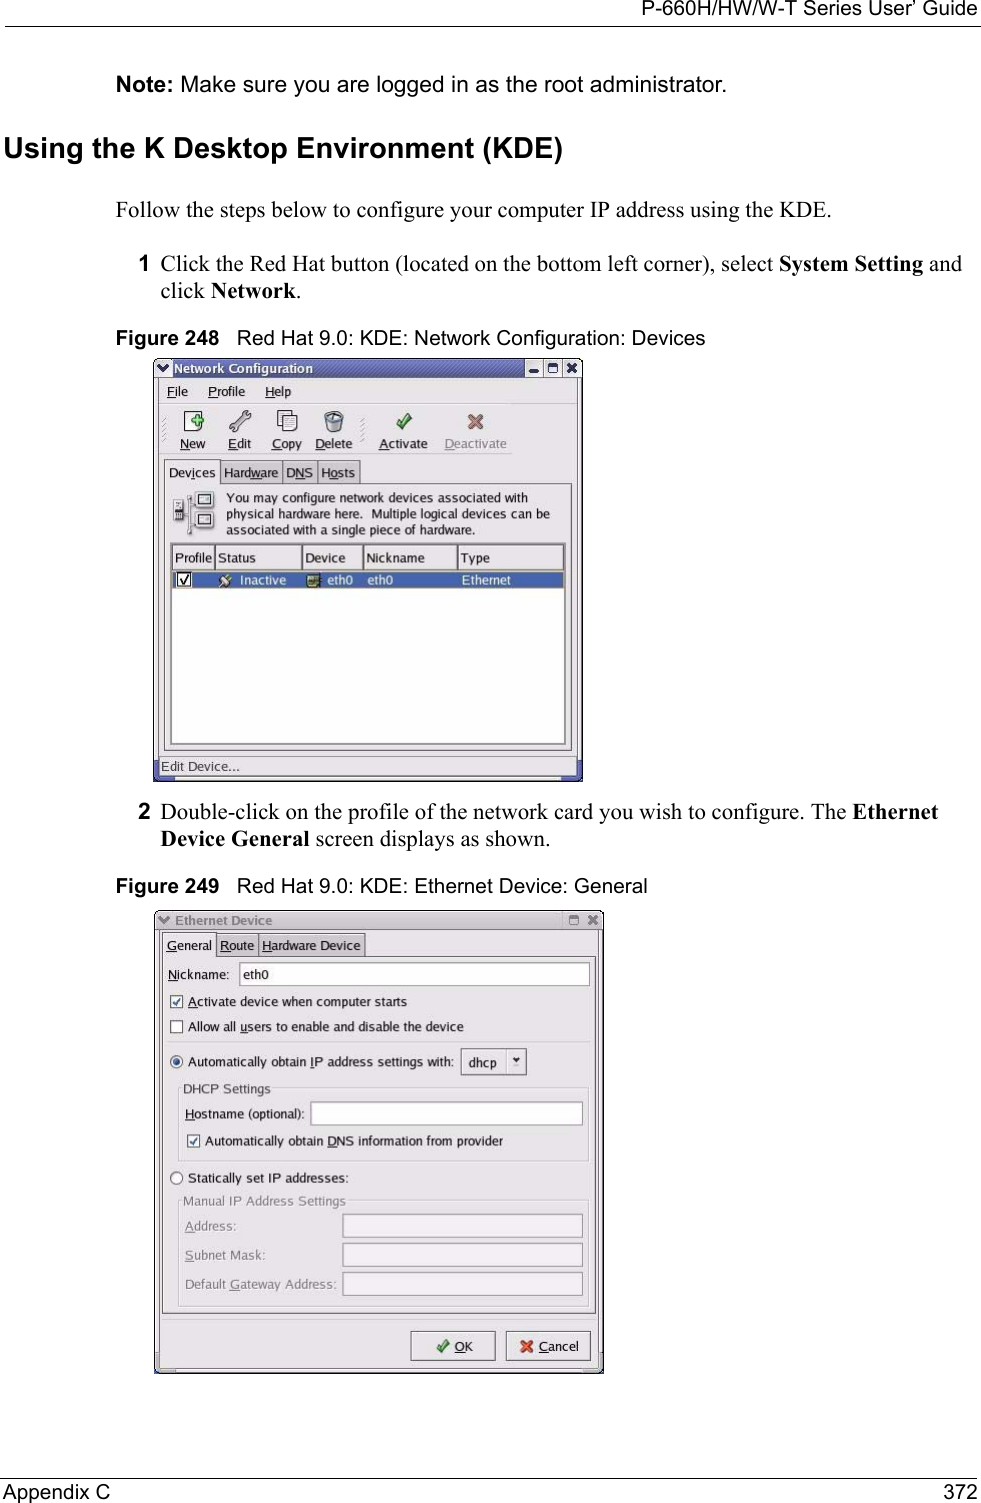 P-660H/HW/W-T Series User’ GuideAppendix C 372Note: Make sure you are logged in as the root administrator. Using the K Desktop Environment (KDE)Follow the steps below to configure your computer IP address using the KDE. 1Click the Red Hat button (located on the bottom left corner), select System Setting and click Network.Figure 248   Red Hat 9.0: KDE: Network Configuration: Devices 2Double-click on the profile of the network card you wish to configure. The Ethernet Device General screen displays as shown. Figure 249   Red Hat 9.0: KDE: Ethernet Device: General  